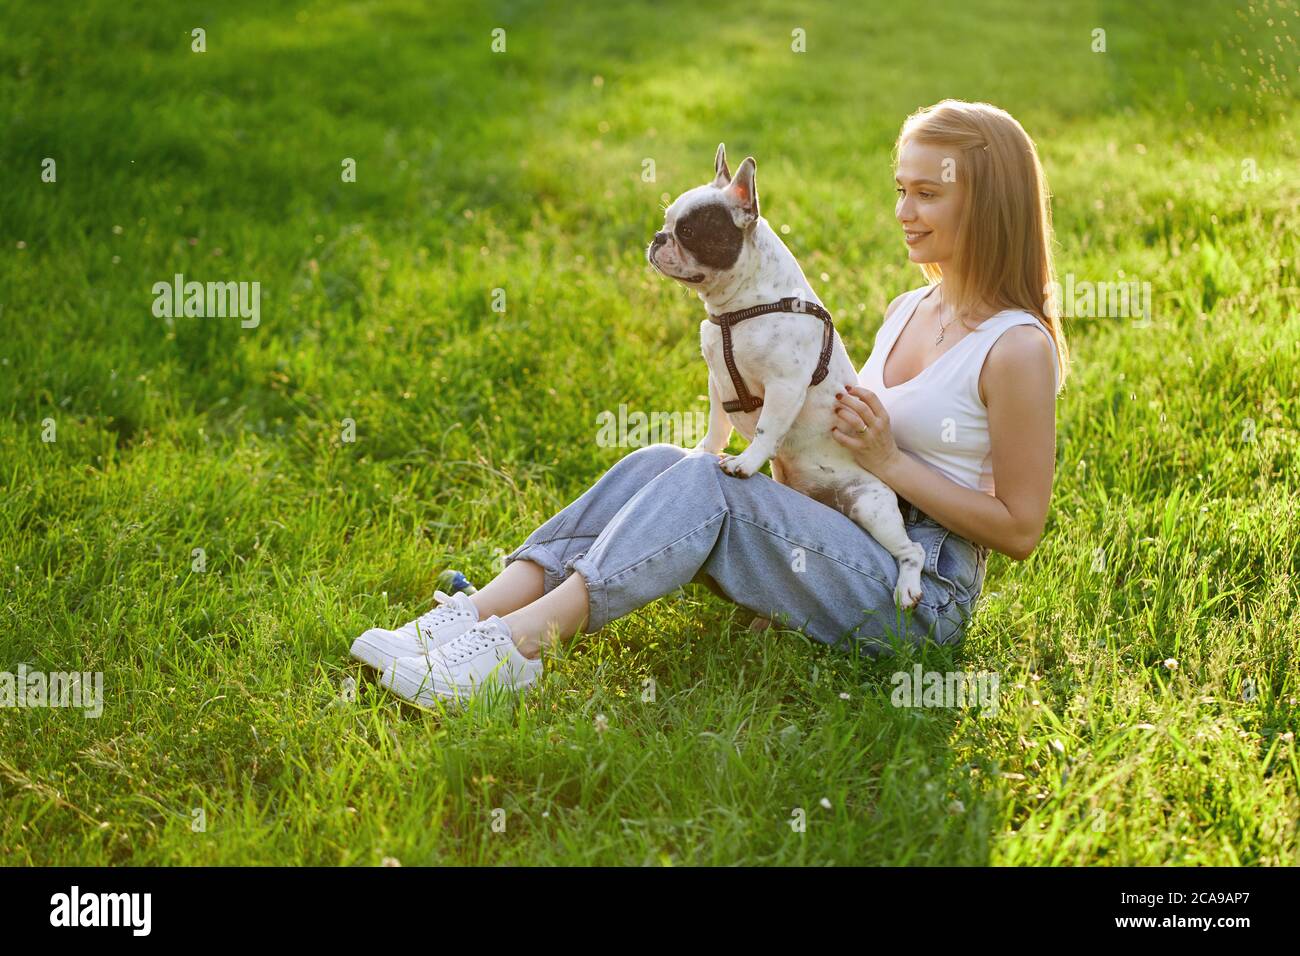 Top view of young happy woman sitting on grass with lovely french bulldog. Gorgeous caucasian smiling girl enjoying summer sunset, holding dog on knees in city park. Human and animal friendship. Stock Photo